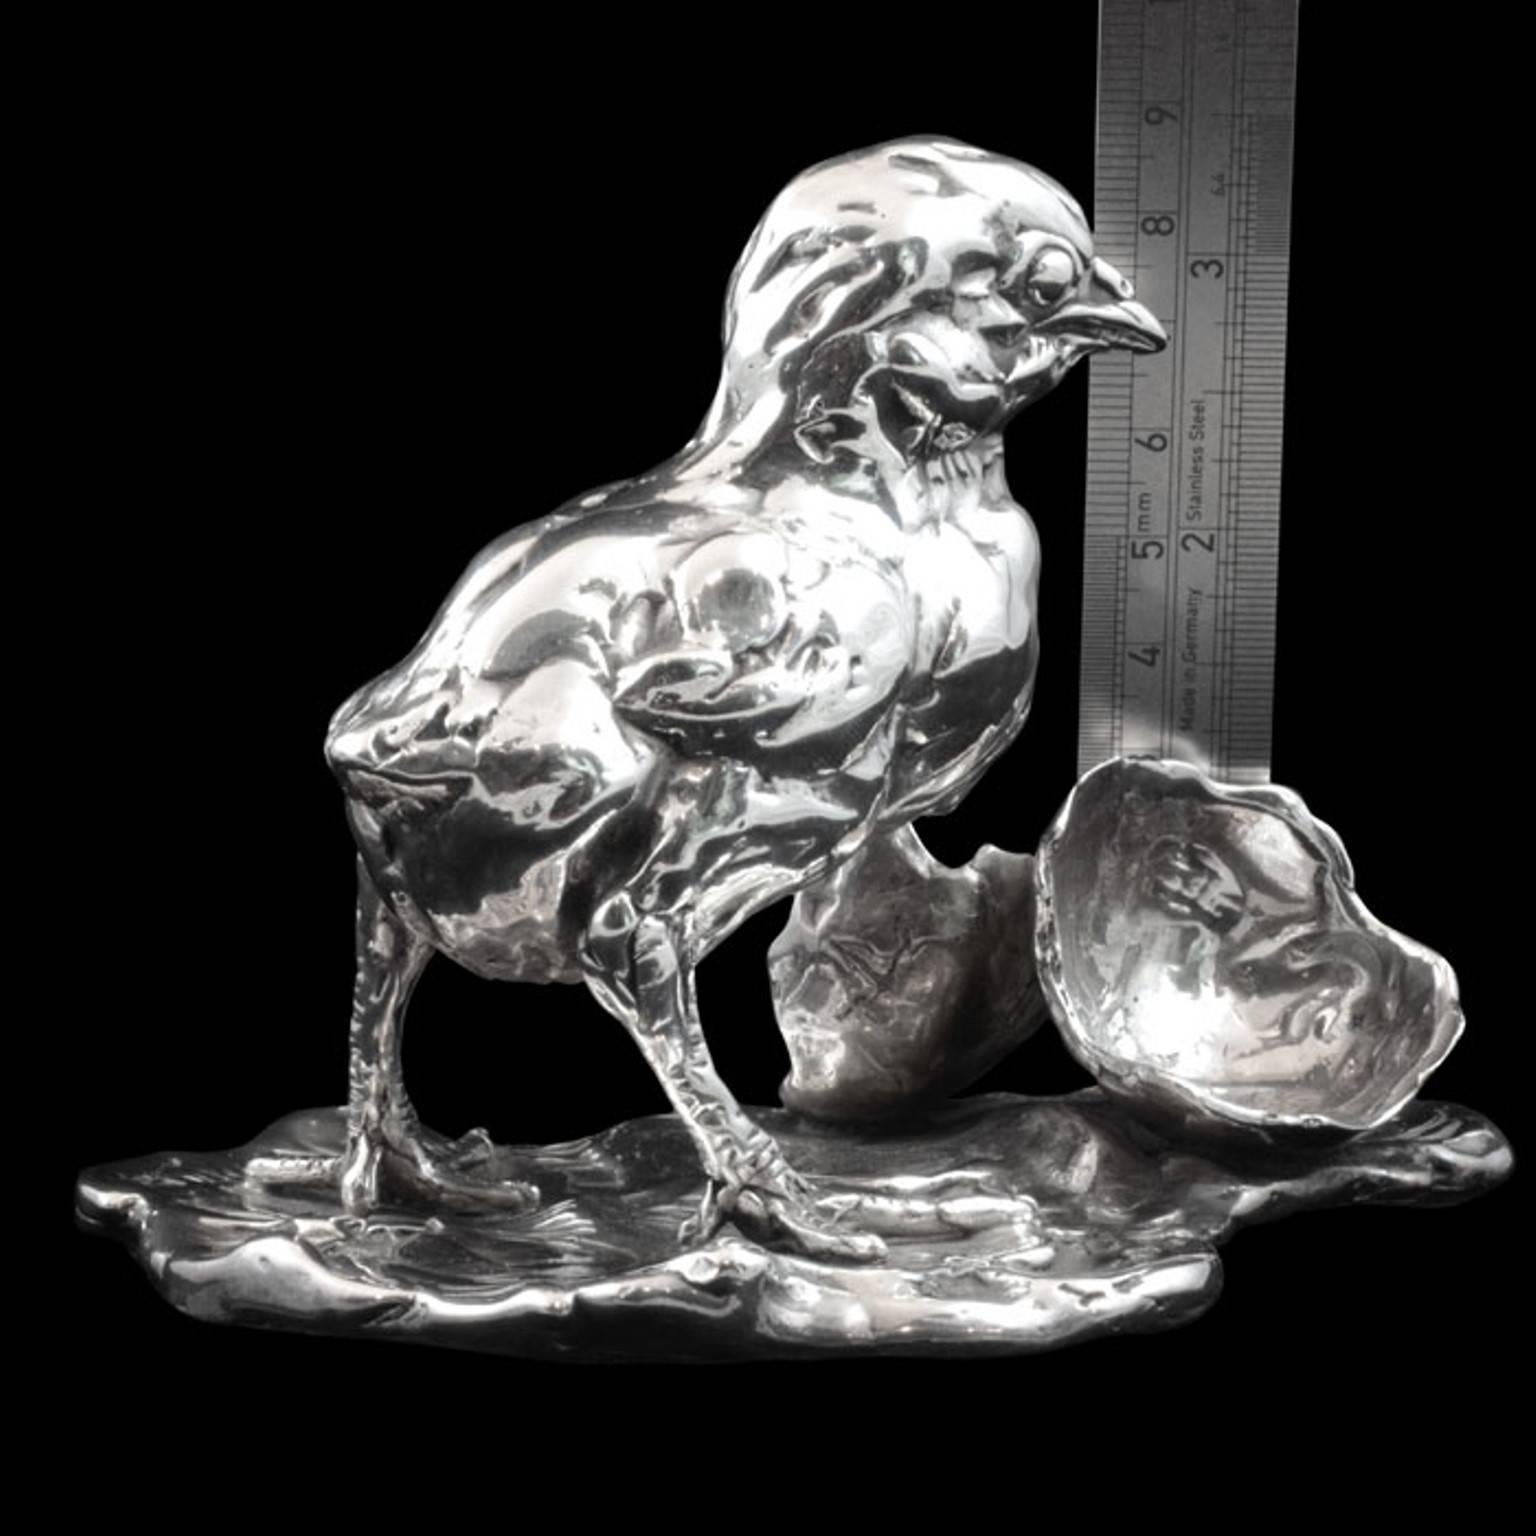  Lucy Kinsella 'Chicken & Egg' Sterling Silver Sculpture 4